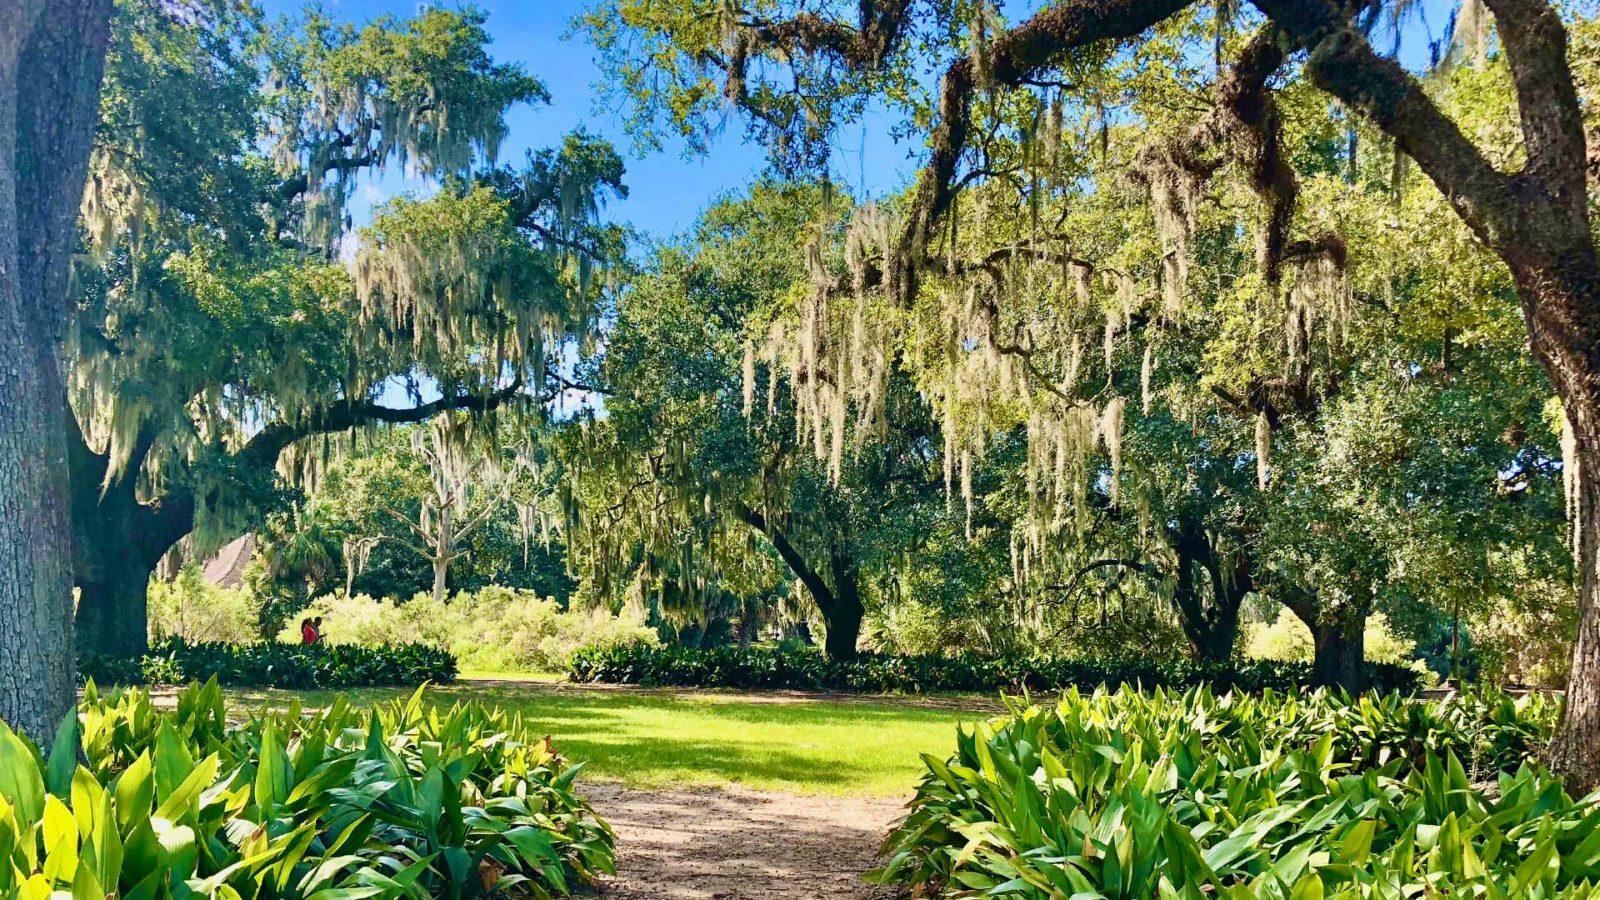 trees and path in City Park of New Orleans